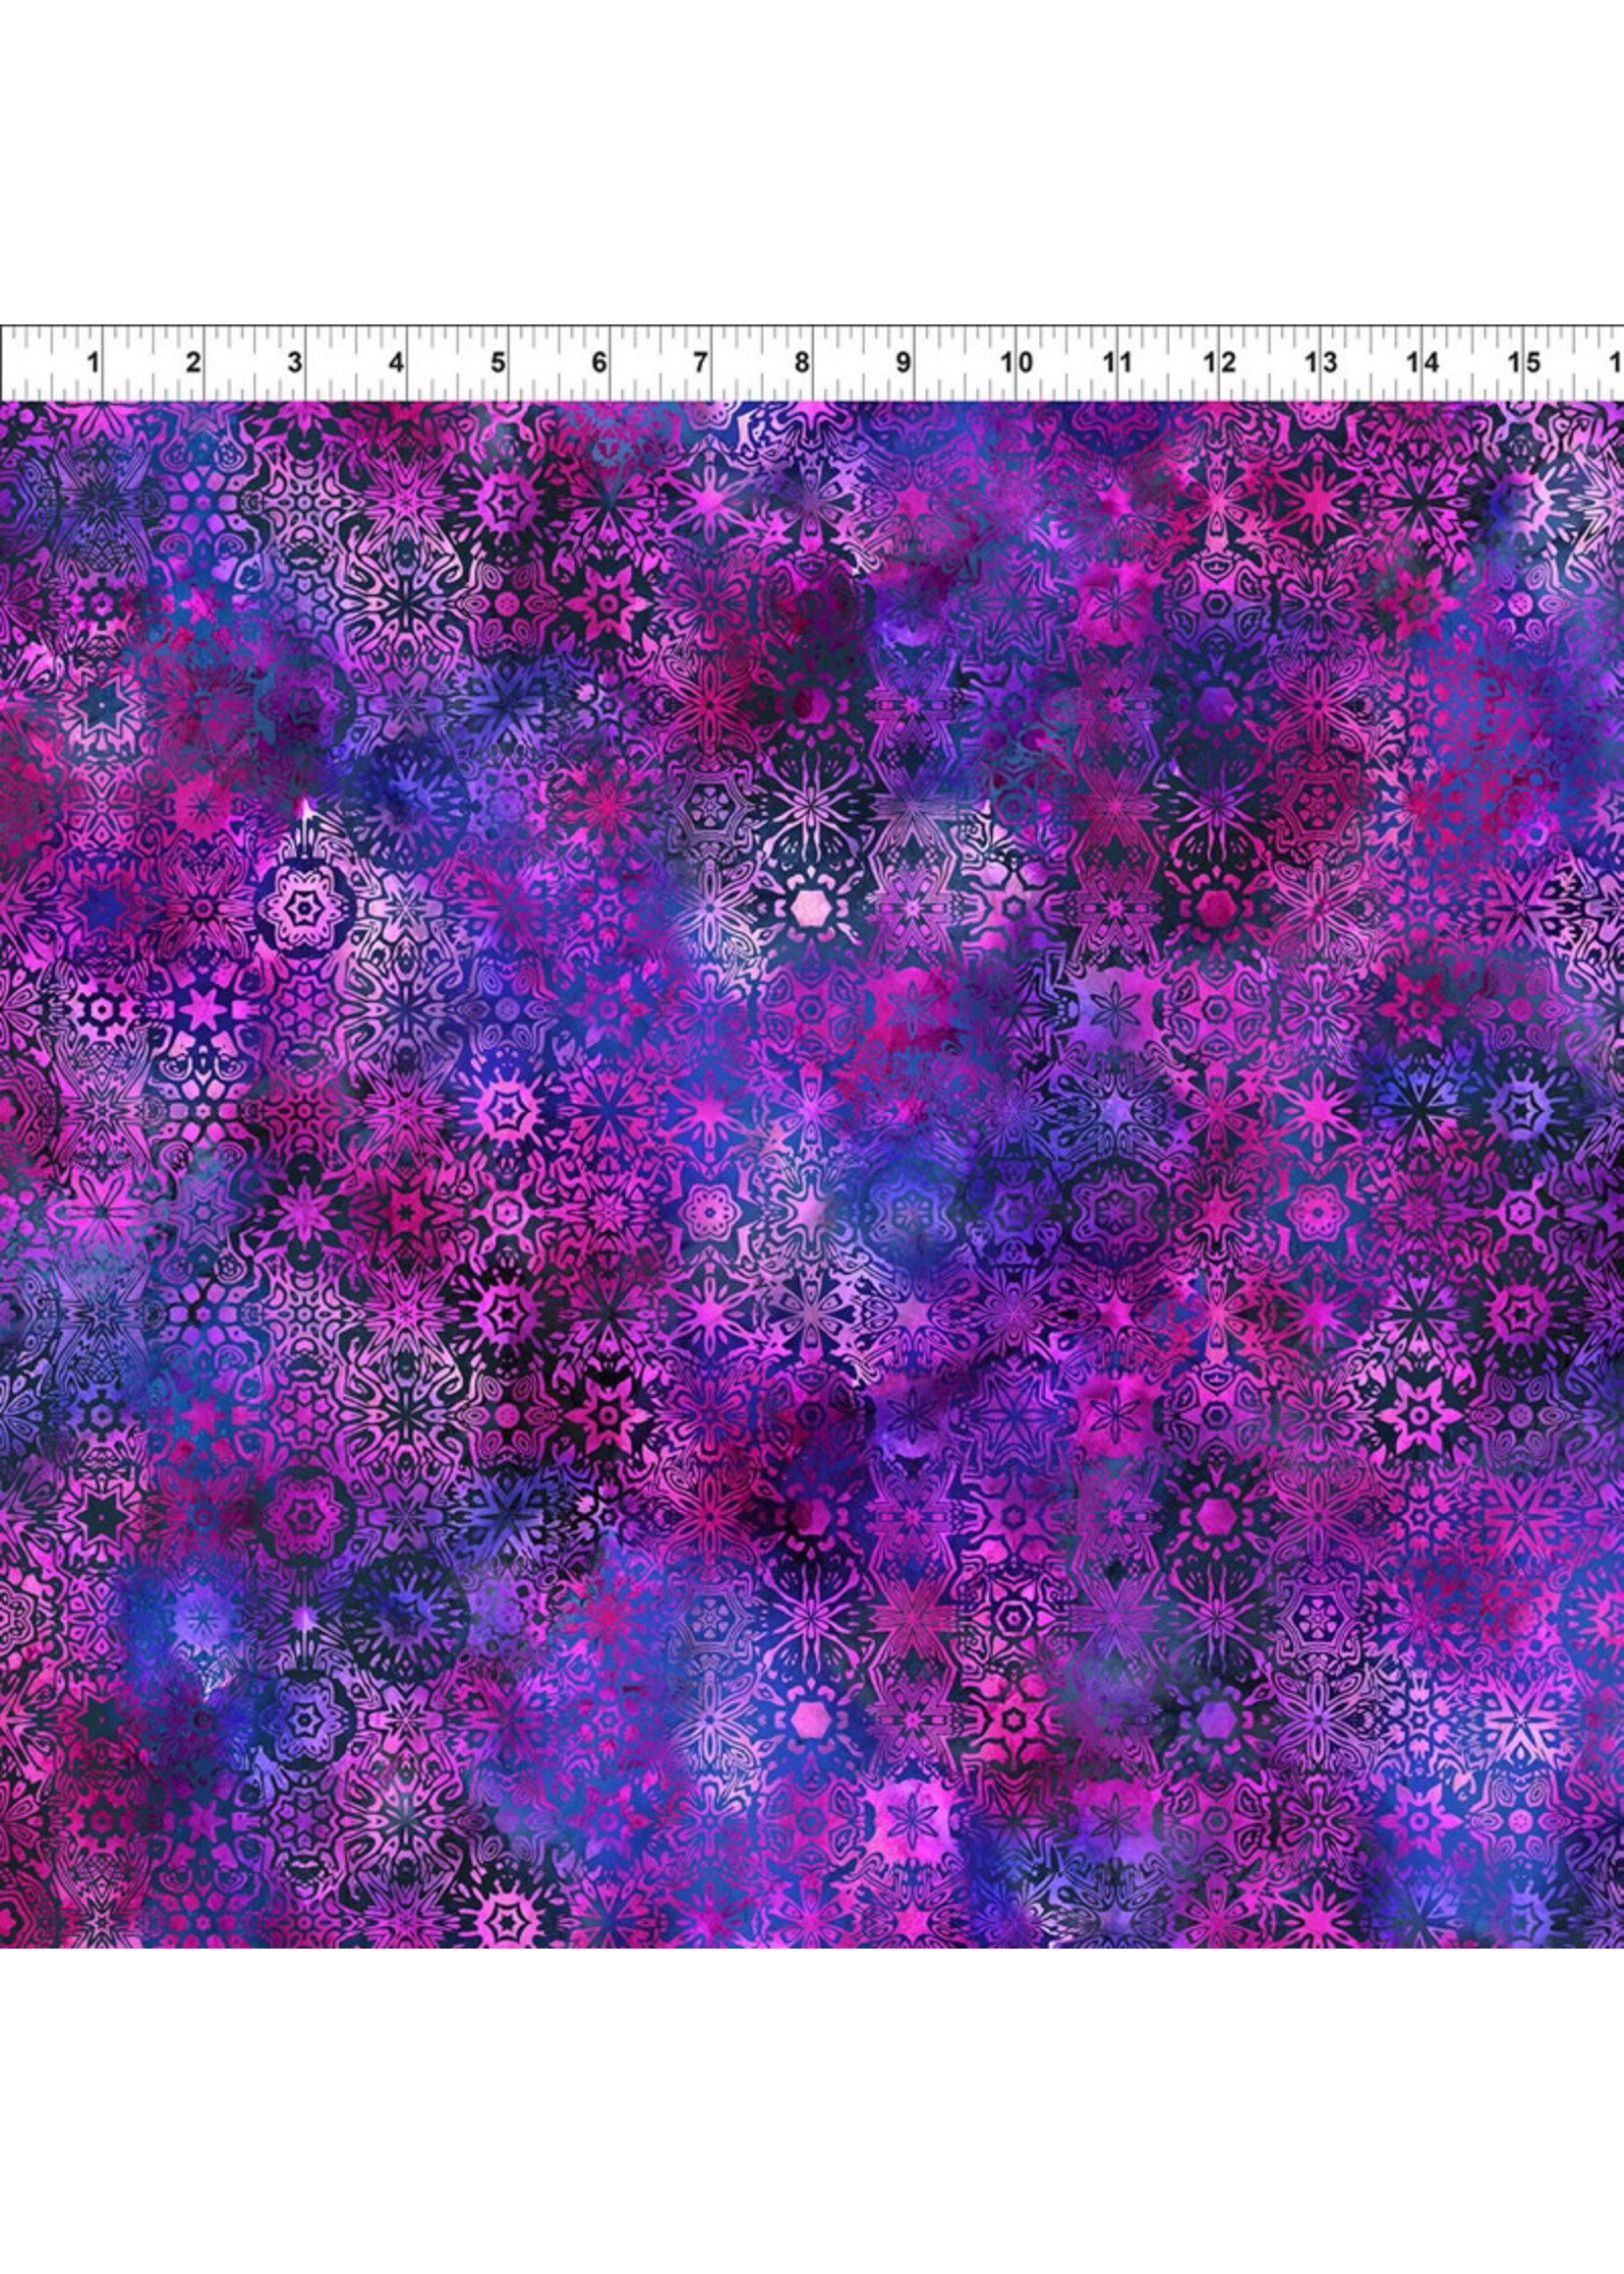 In The Beginning Impressions - Small Mosaic - Magenta - 5JYS3